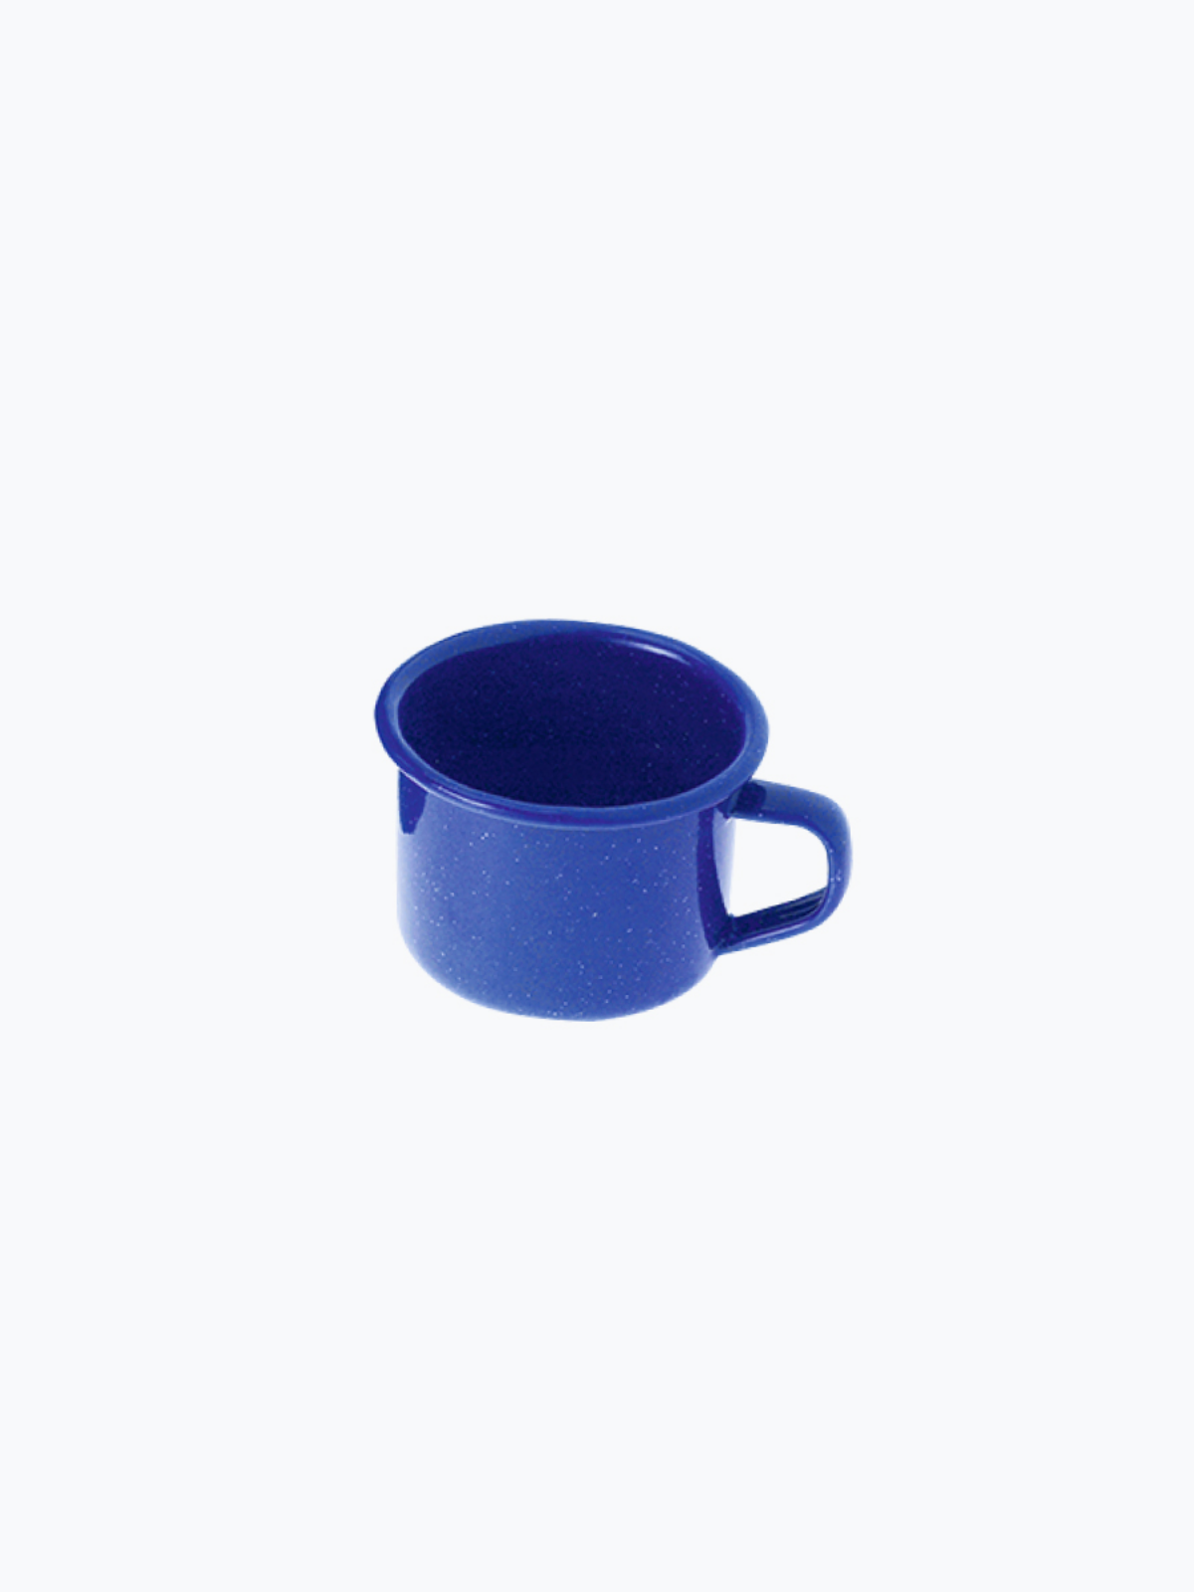 [GSI Outdoors] 4oz CUP (BLUE)